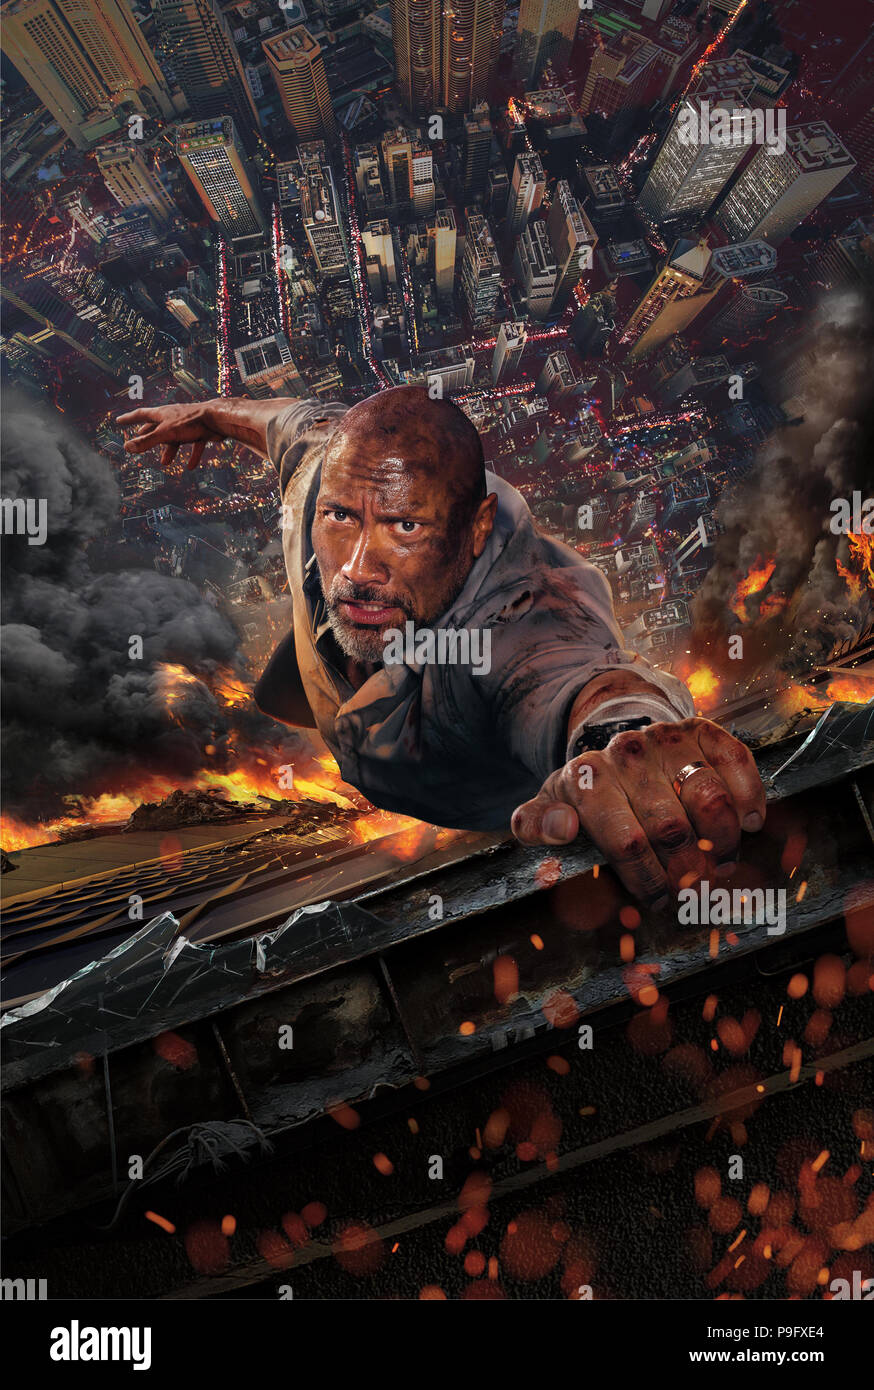 RELEASE DATE: July 13, 2018 TITLE: Skyscraper STUDIO: Universal Pictures DIRECTOR: Rawson Marshall Thurber PLOT: A father goes to great lengths to save his family from a burning skyscraper. STARRING: DWAYNE JOHNSON as Will Sawyer poster art. (Credit Image: © Universal Pictures/Entertainment Pictures) Stock Photo